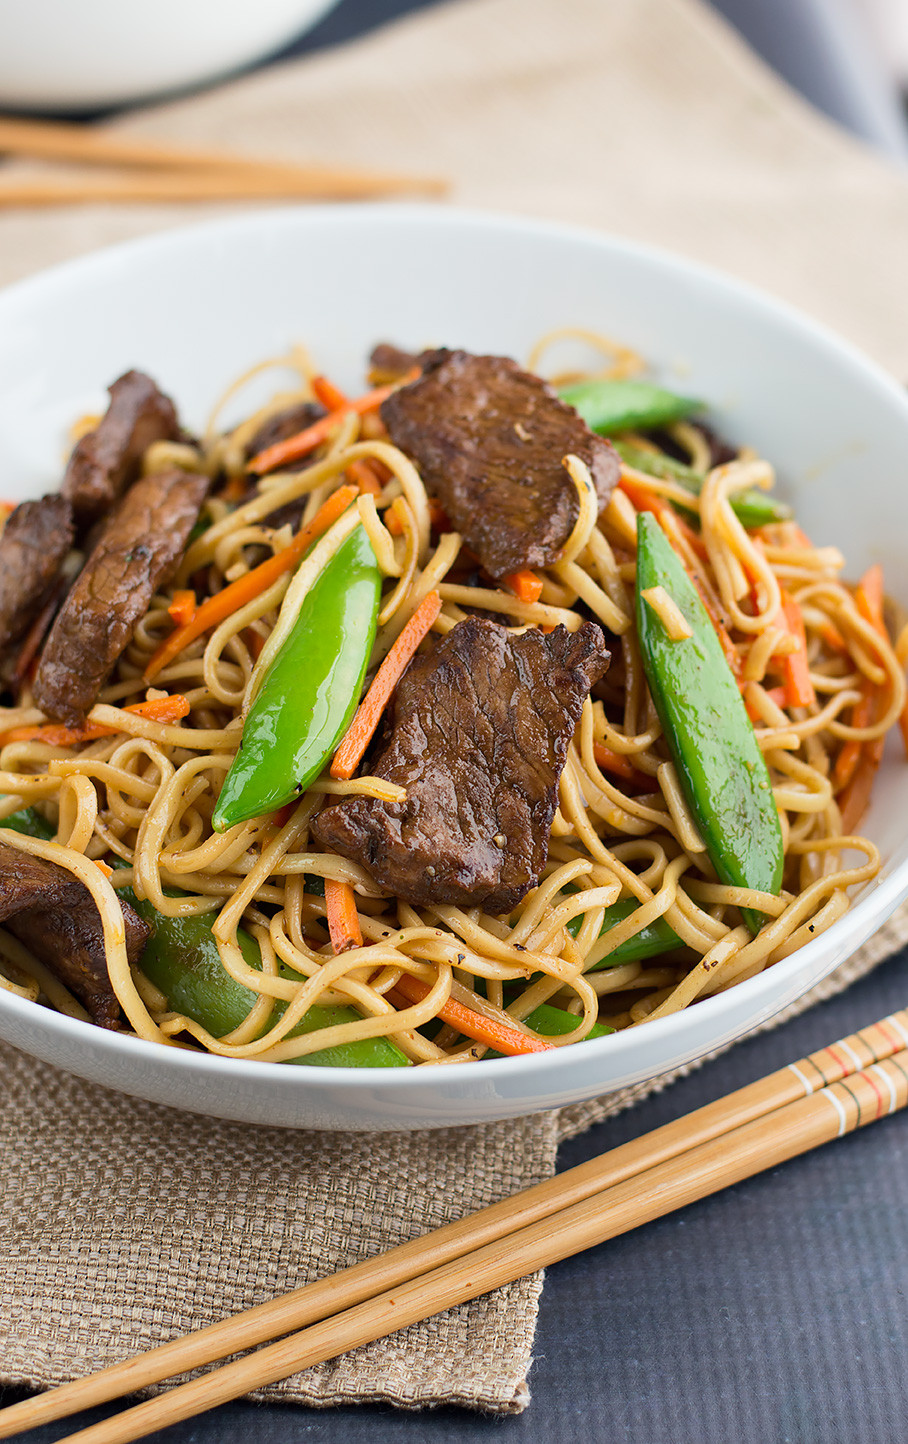 Beef Stir Fry Noodles
 Red Thai Curry Stir Fried Chinese Noodles with Beef